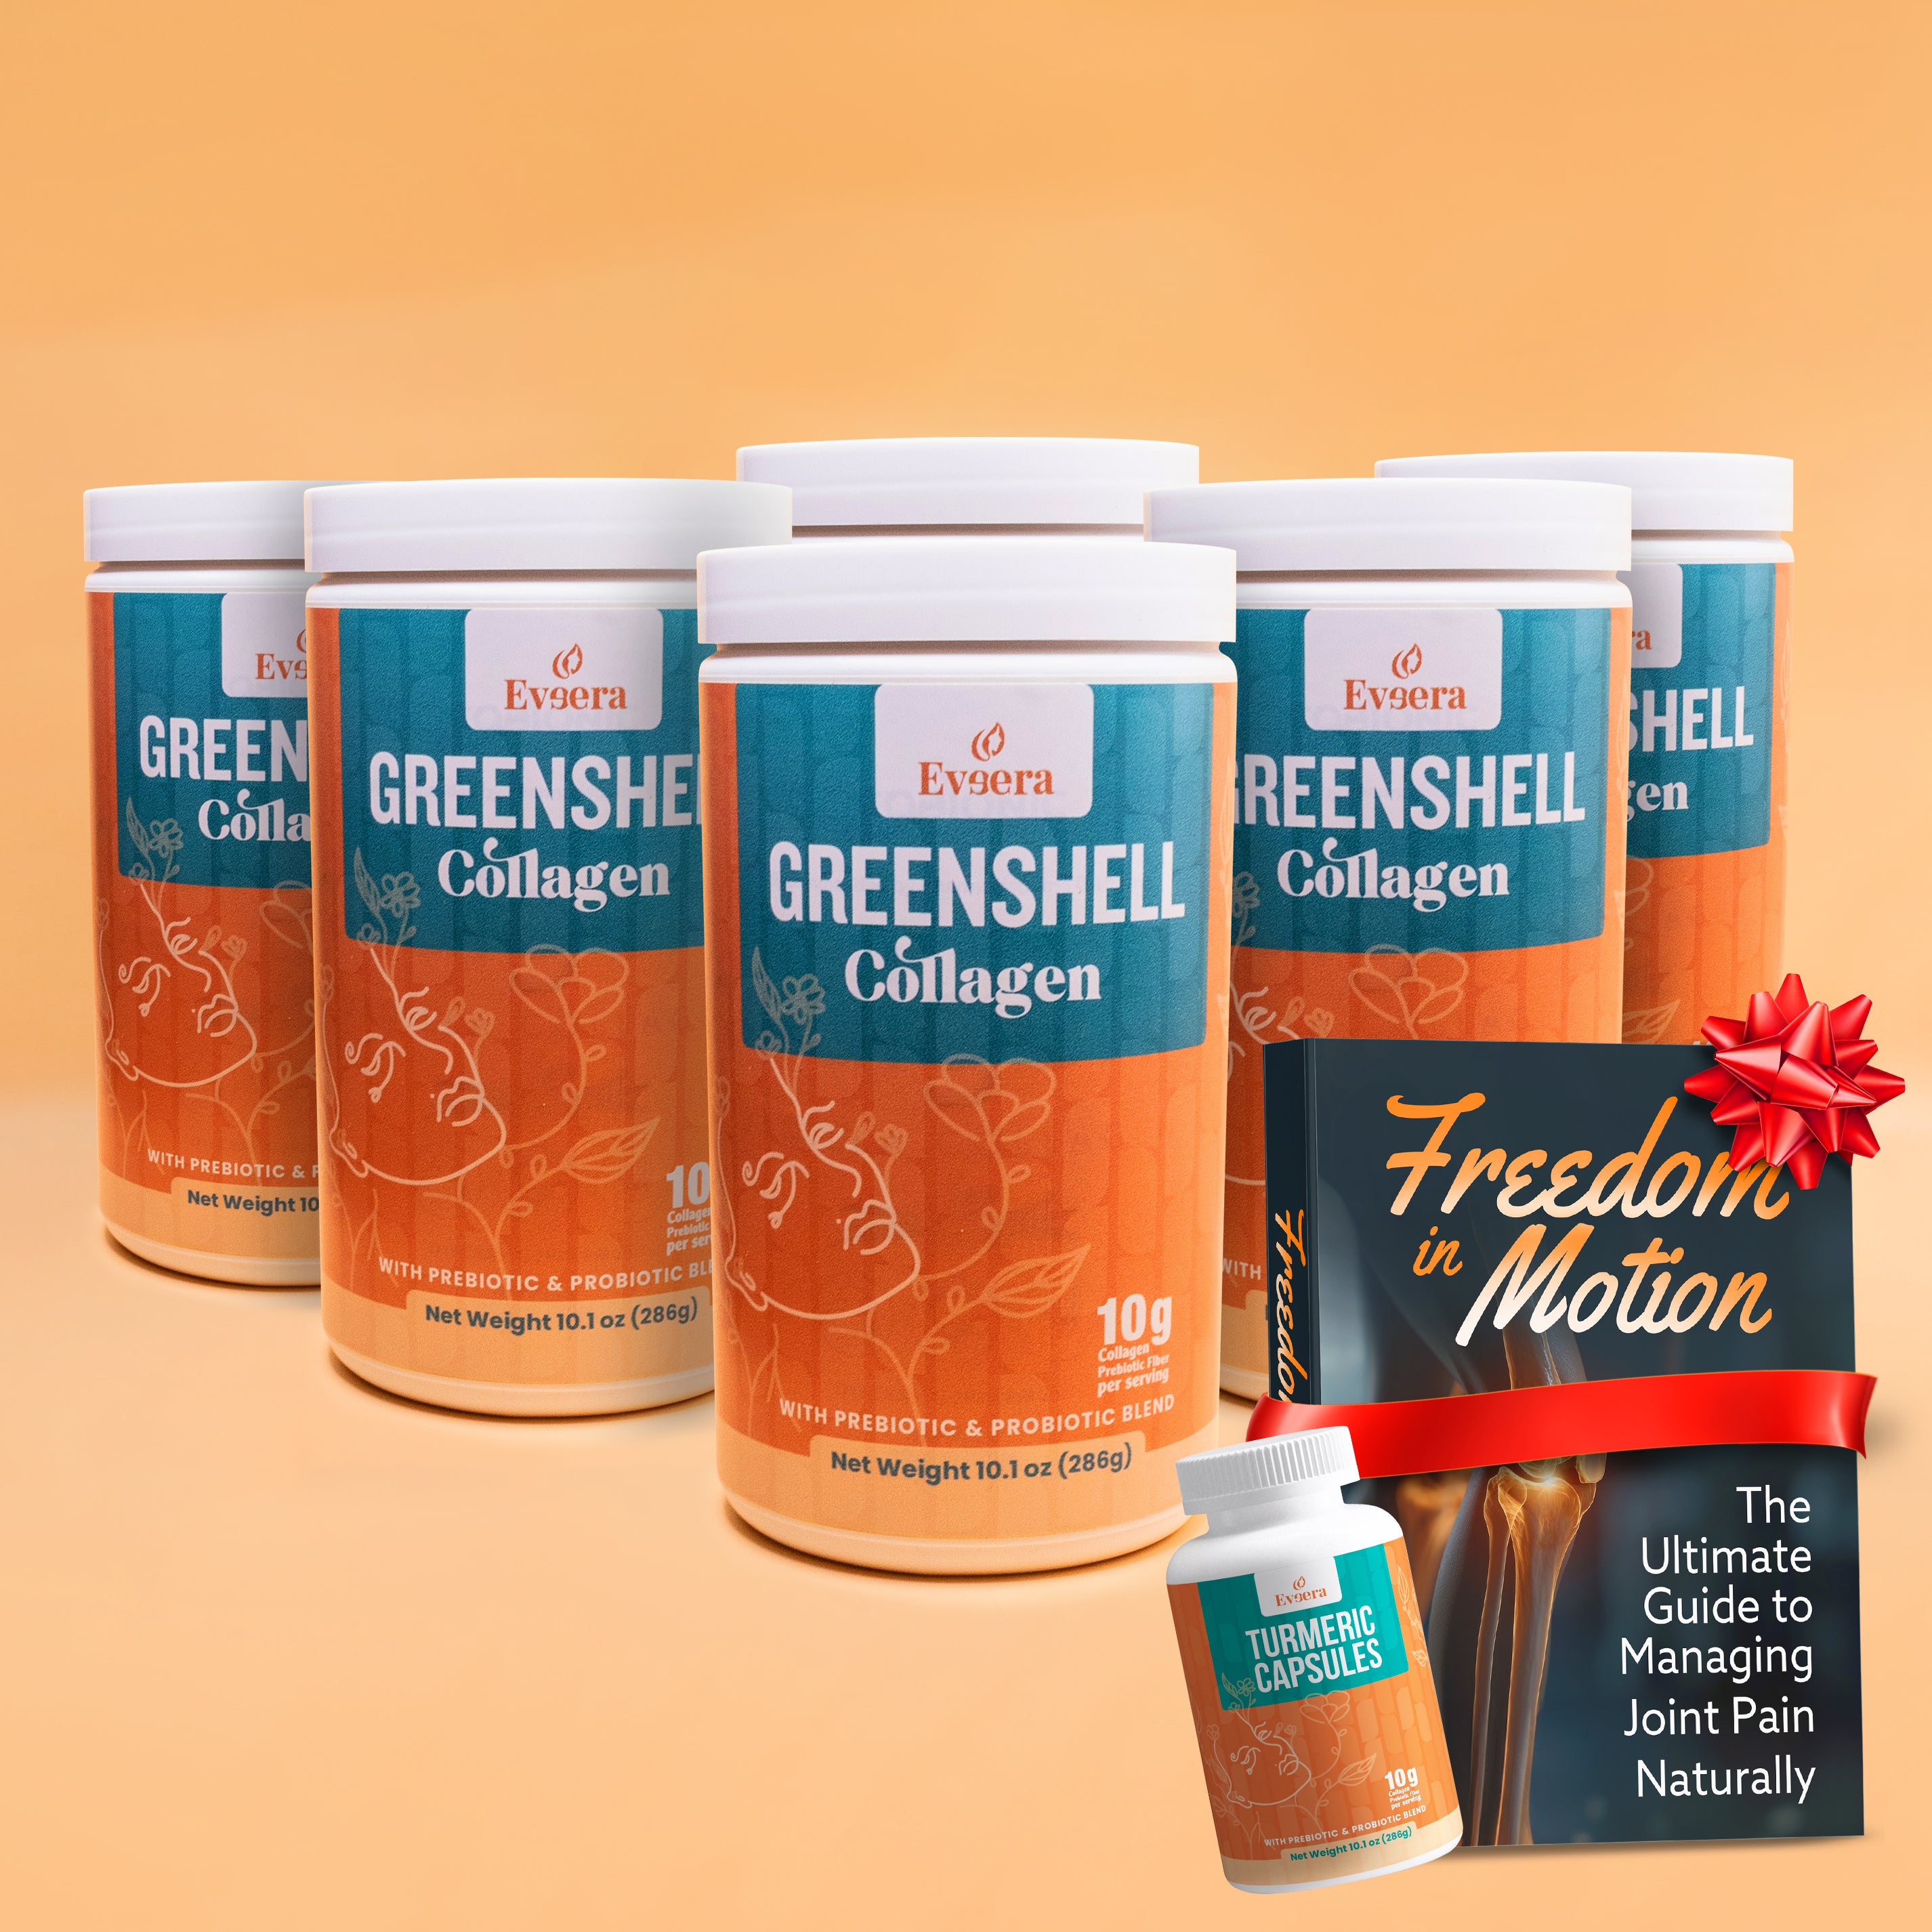 Collagen supplement containers with a book titled 'Freedom in Motion' and turmeric capsules on an orange background.